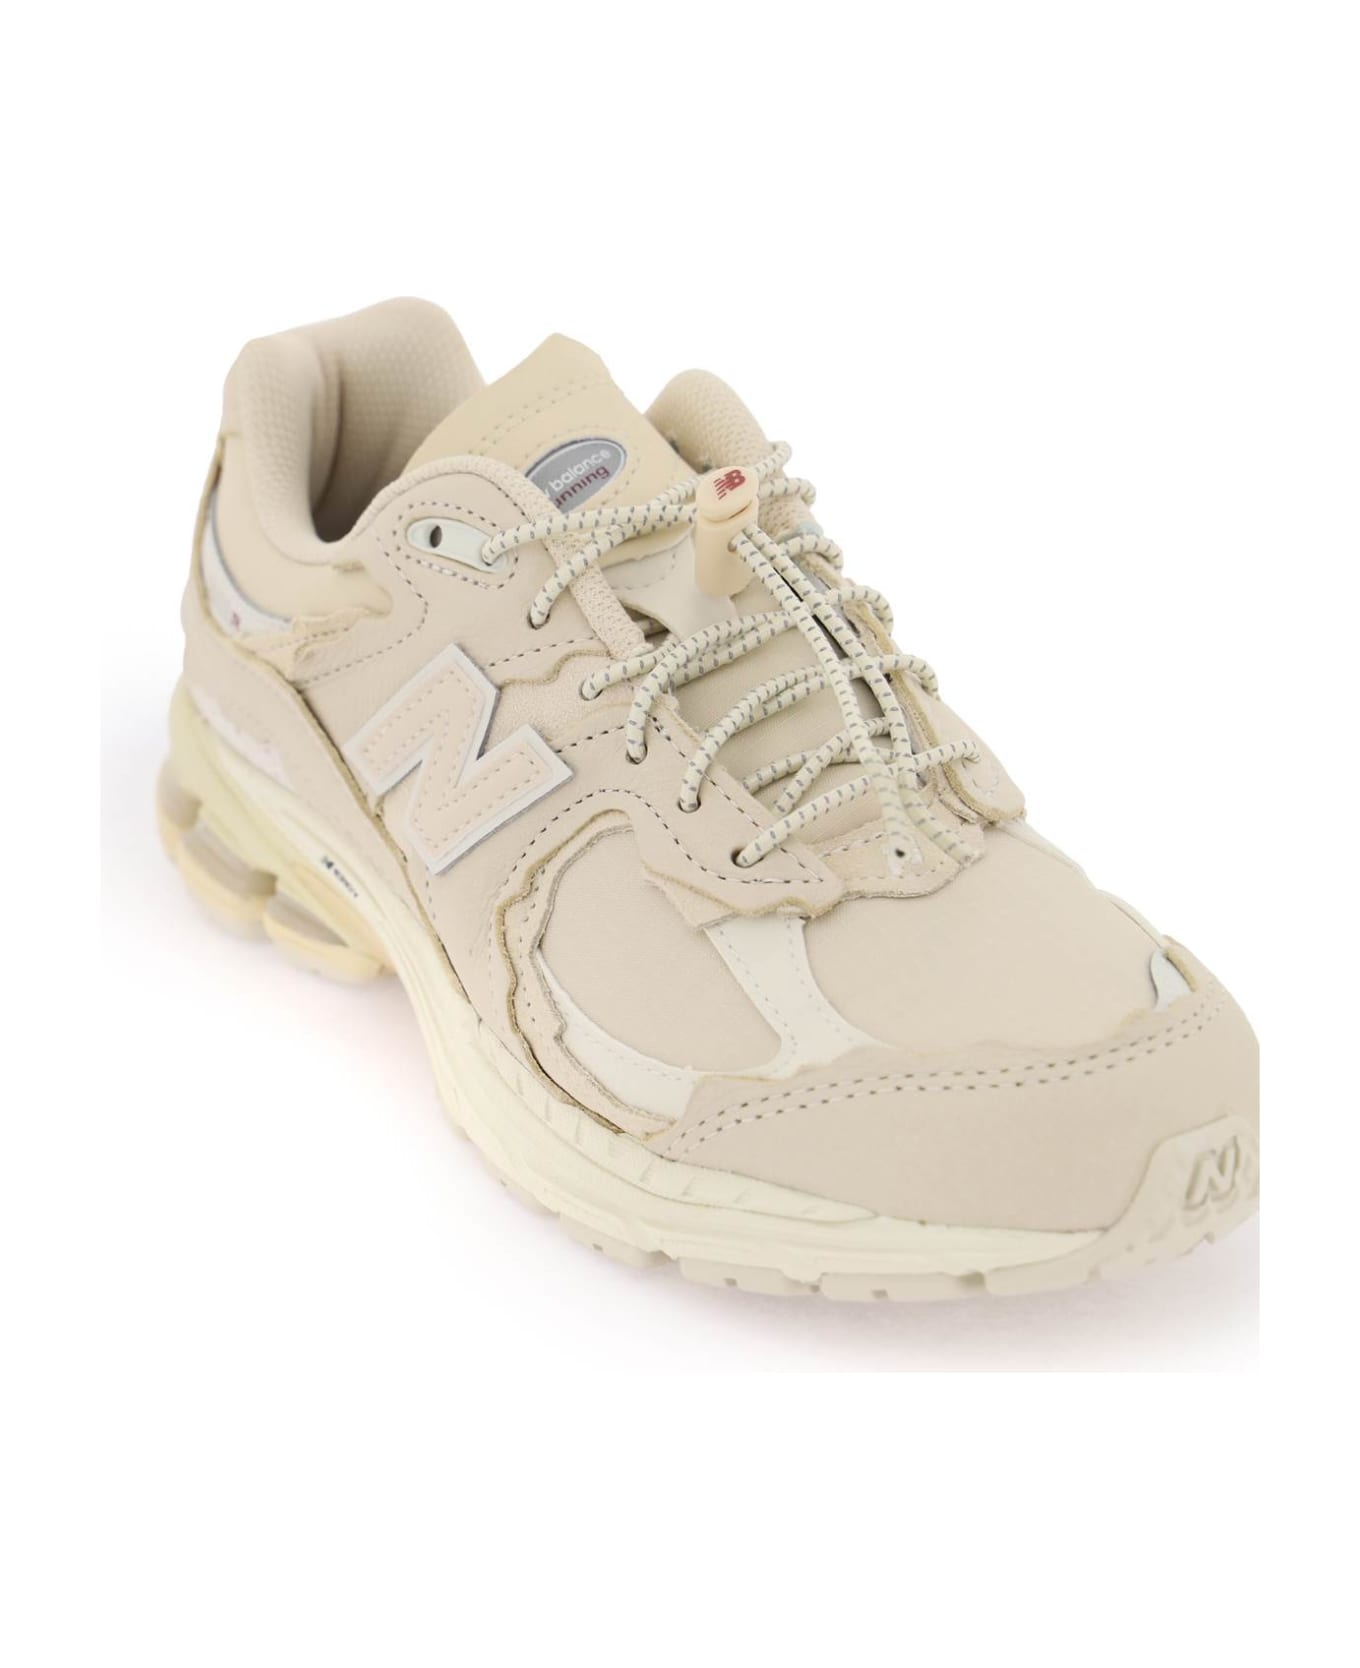 New Balance 2002rd Sneakers - SAND STONE (Beige) スニーカー